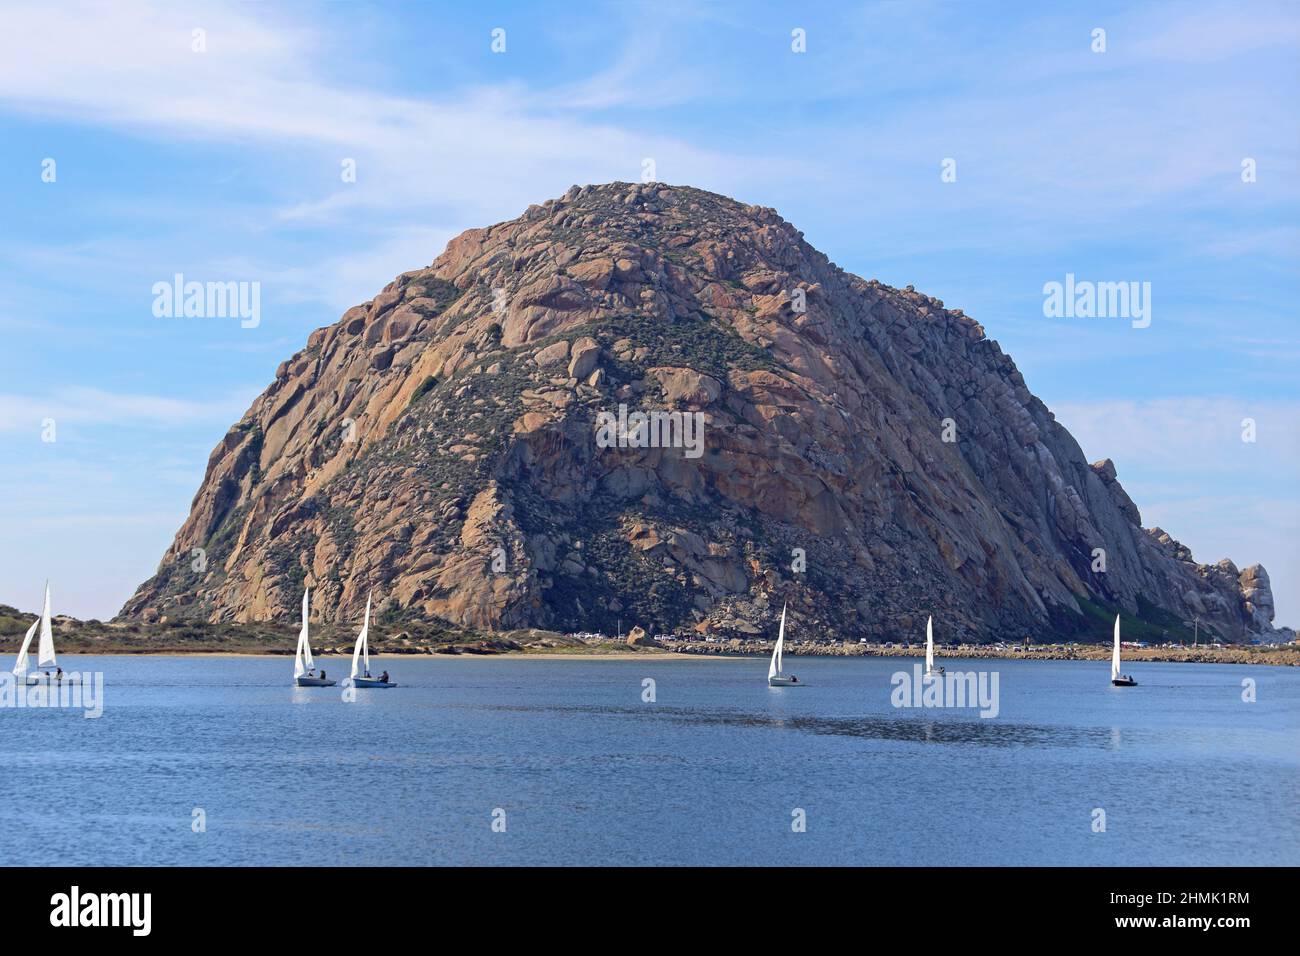 Morro Rock, which is an ancient volcanic plug located in Morro Bay, California, is shown during the day, with dinghy sailboats in the harbor. Stock Photo